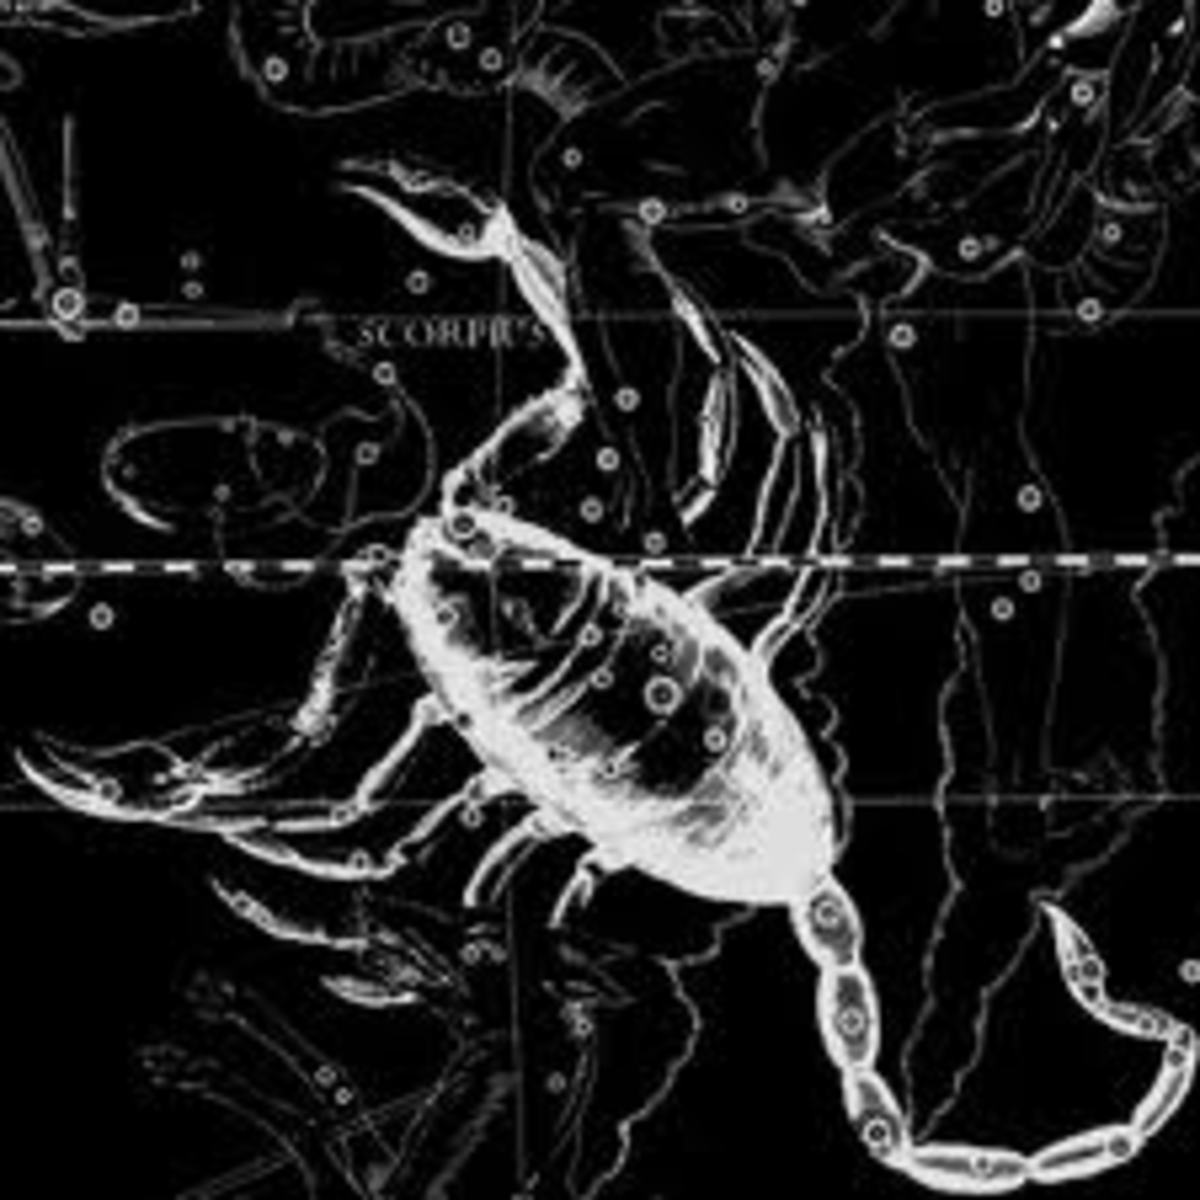 Scorpio is the 8th sign in the zodiac.It is ruled by Pluto. Pluto is associated with the underworld and the unseen. Scorpio is also a fixed water sign. Scorpios are highy instinctual, and not easily swayed once they believe in something.